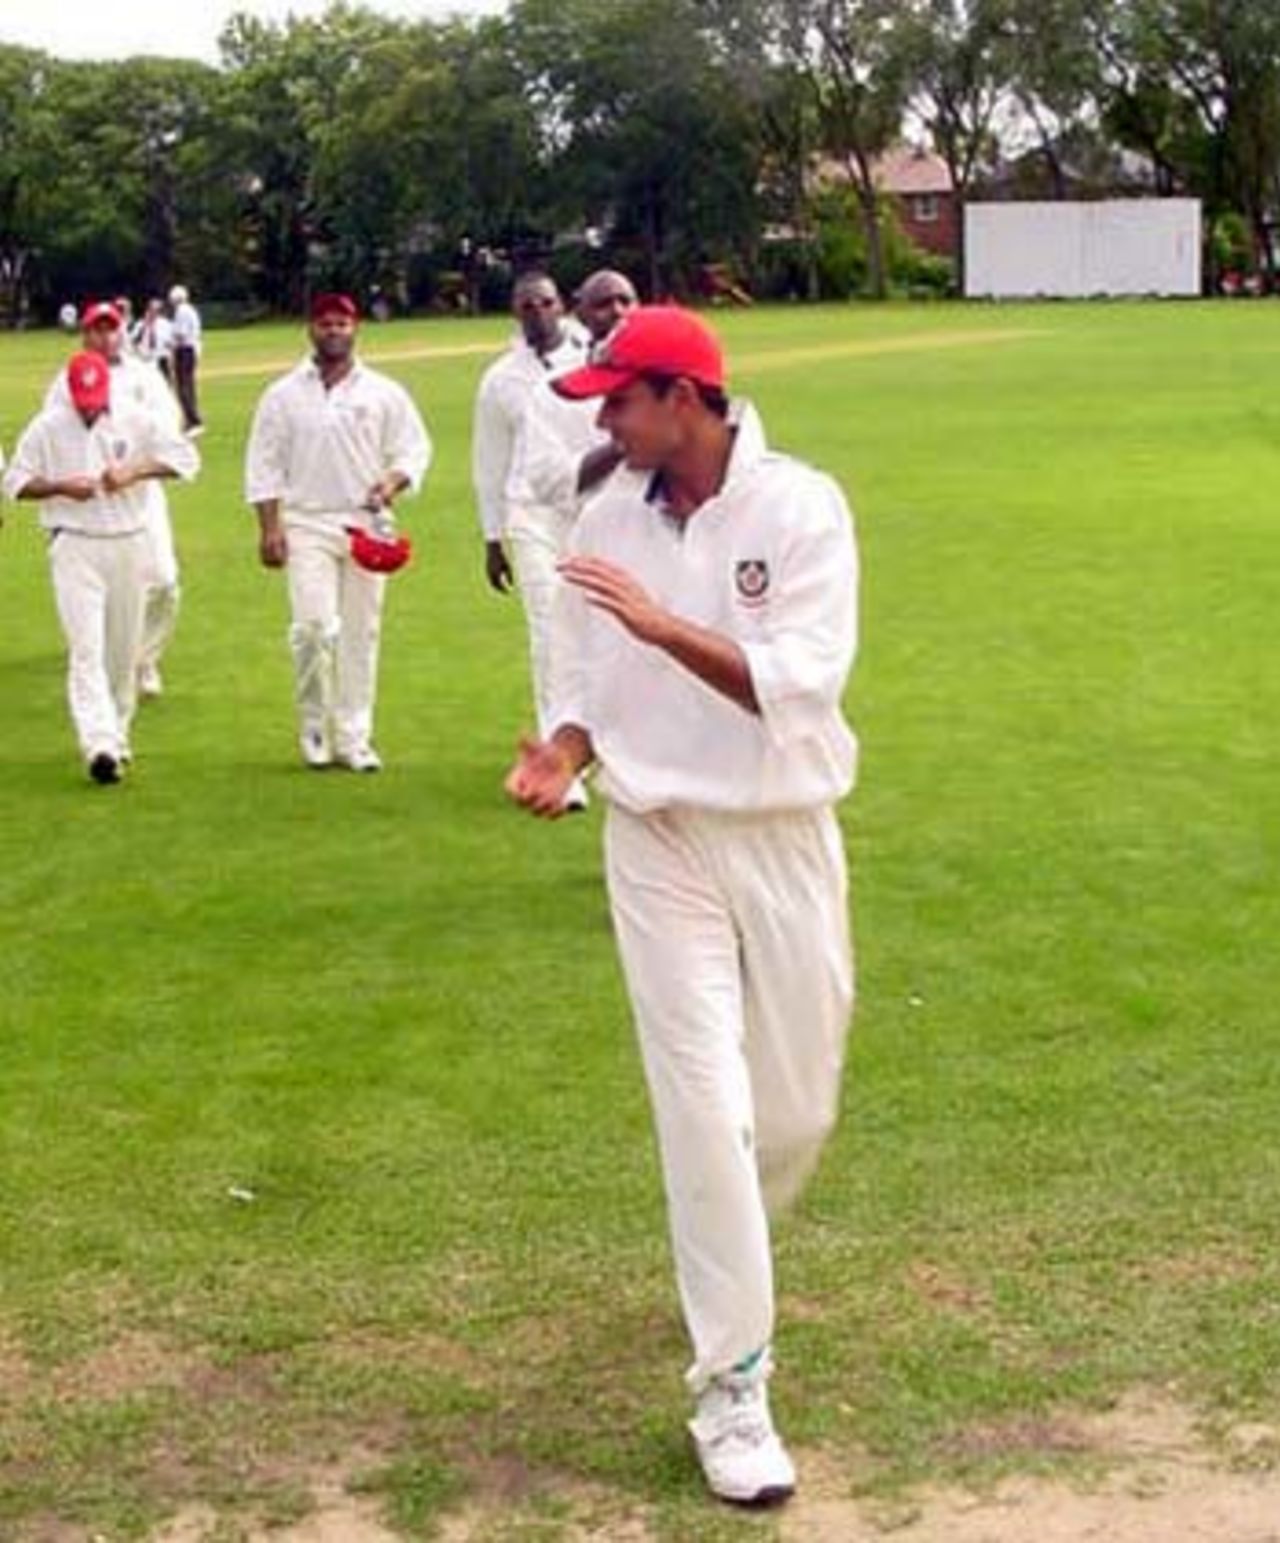 Umar Bhatti leads the Canadian team off the field after taking 8 for 40, Canada v Bermuda, Toronto, August 23, 2005